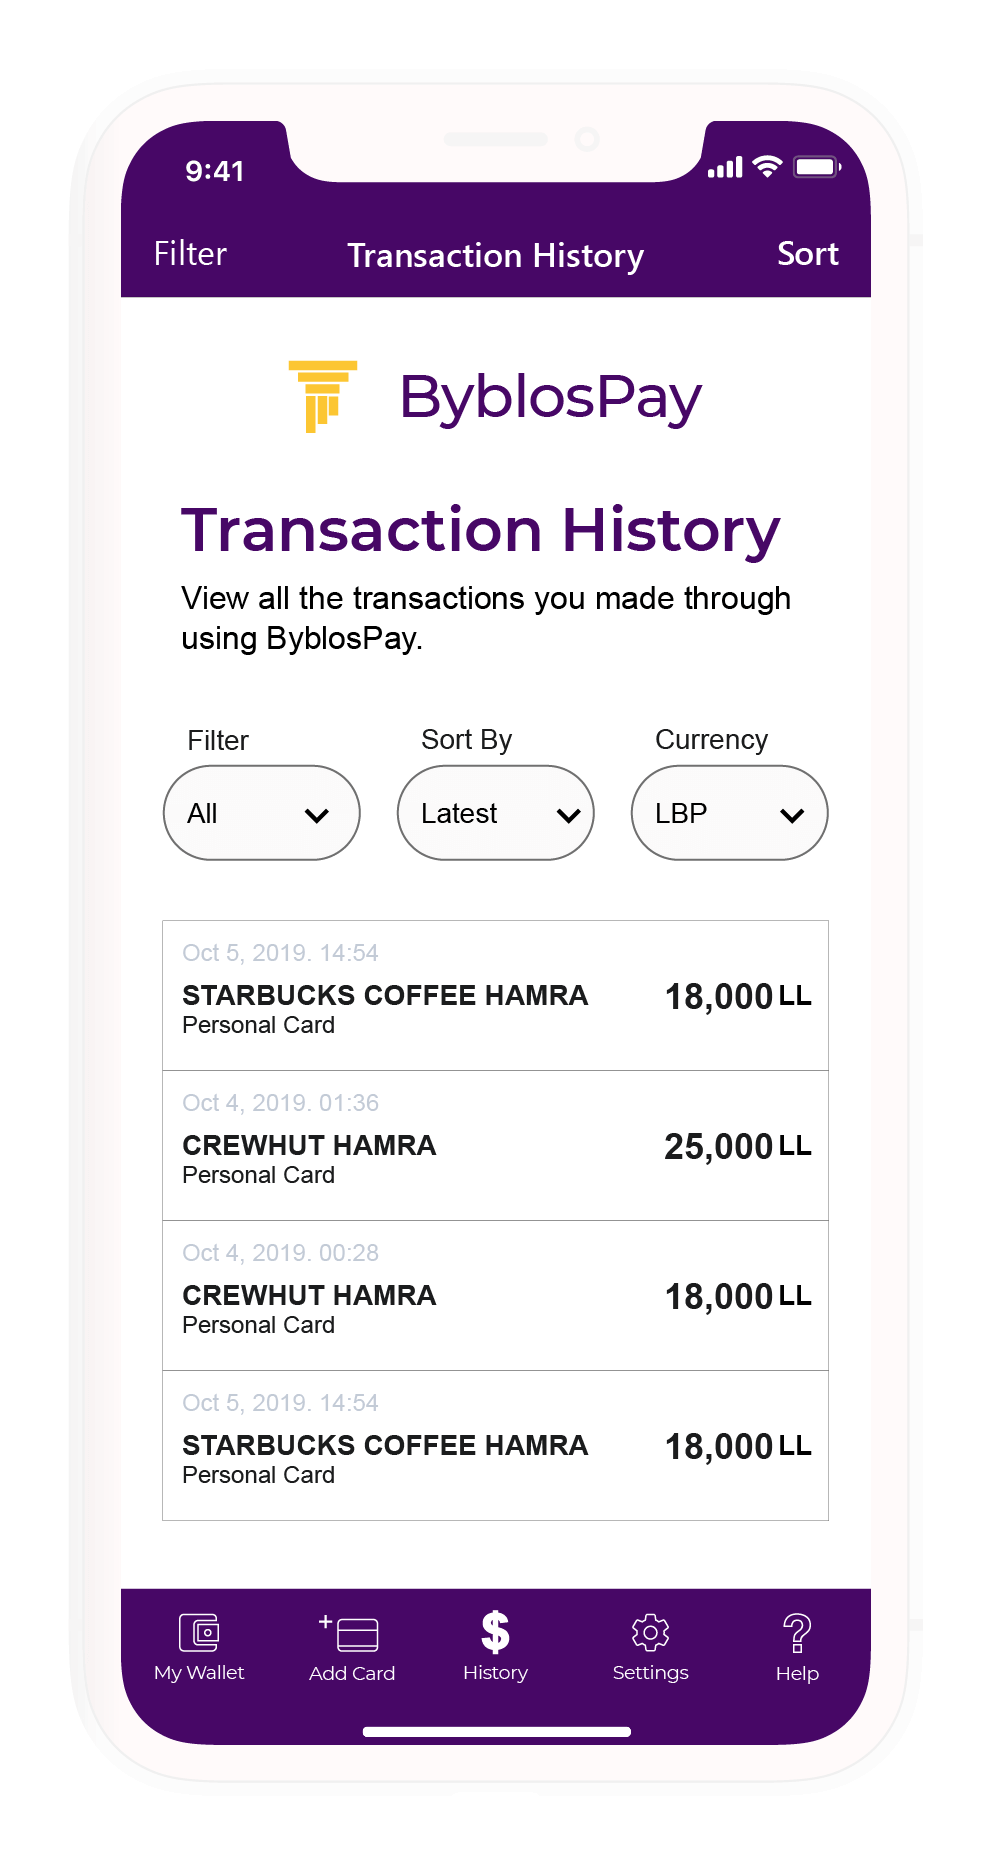 The UI design of the transaction history page showing recent purchases using the app